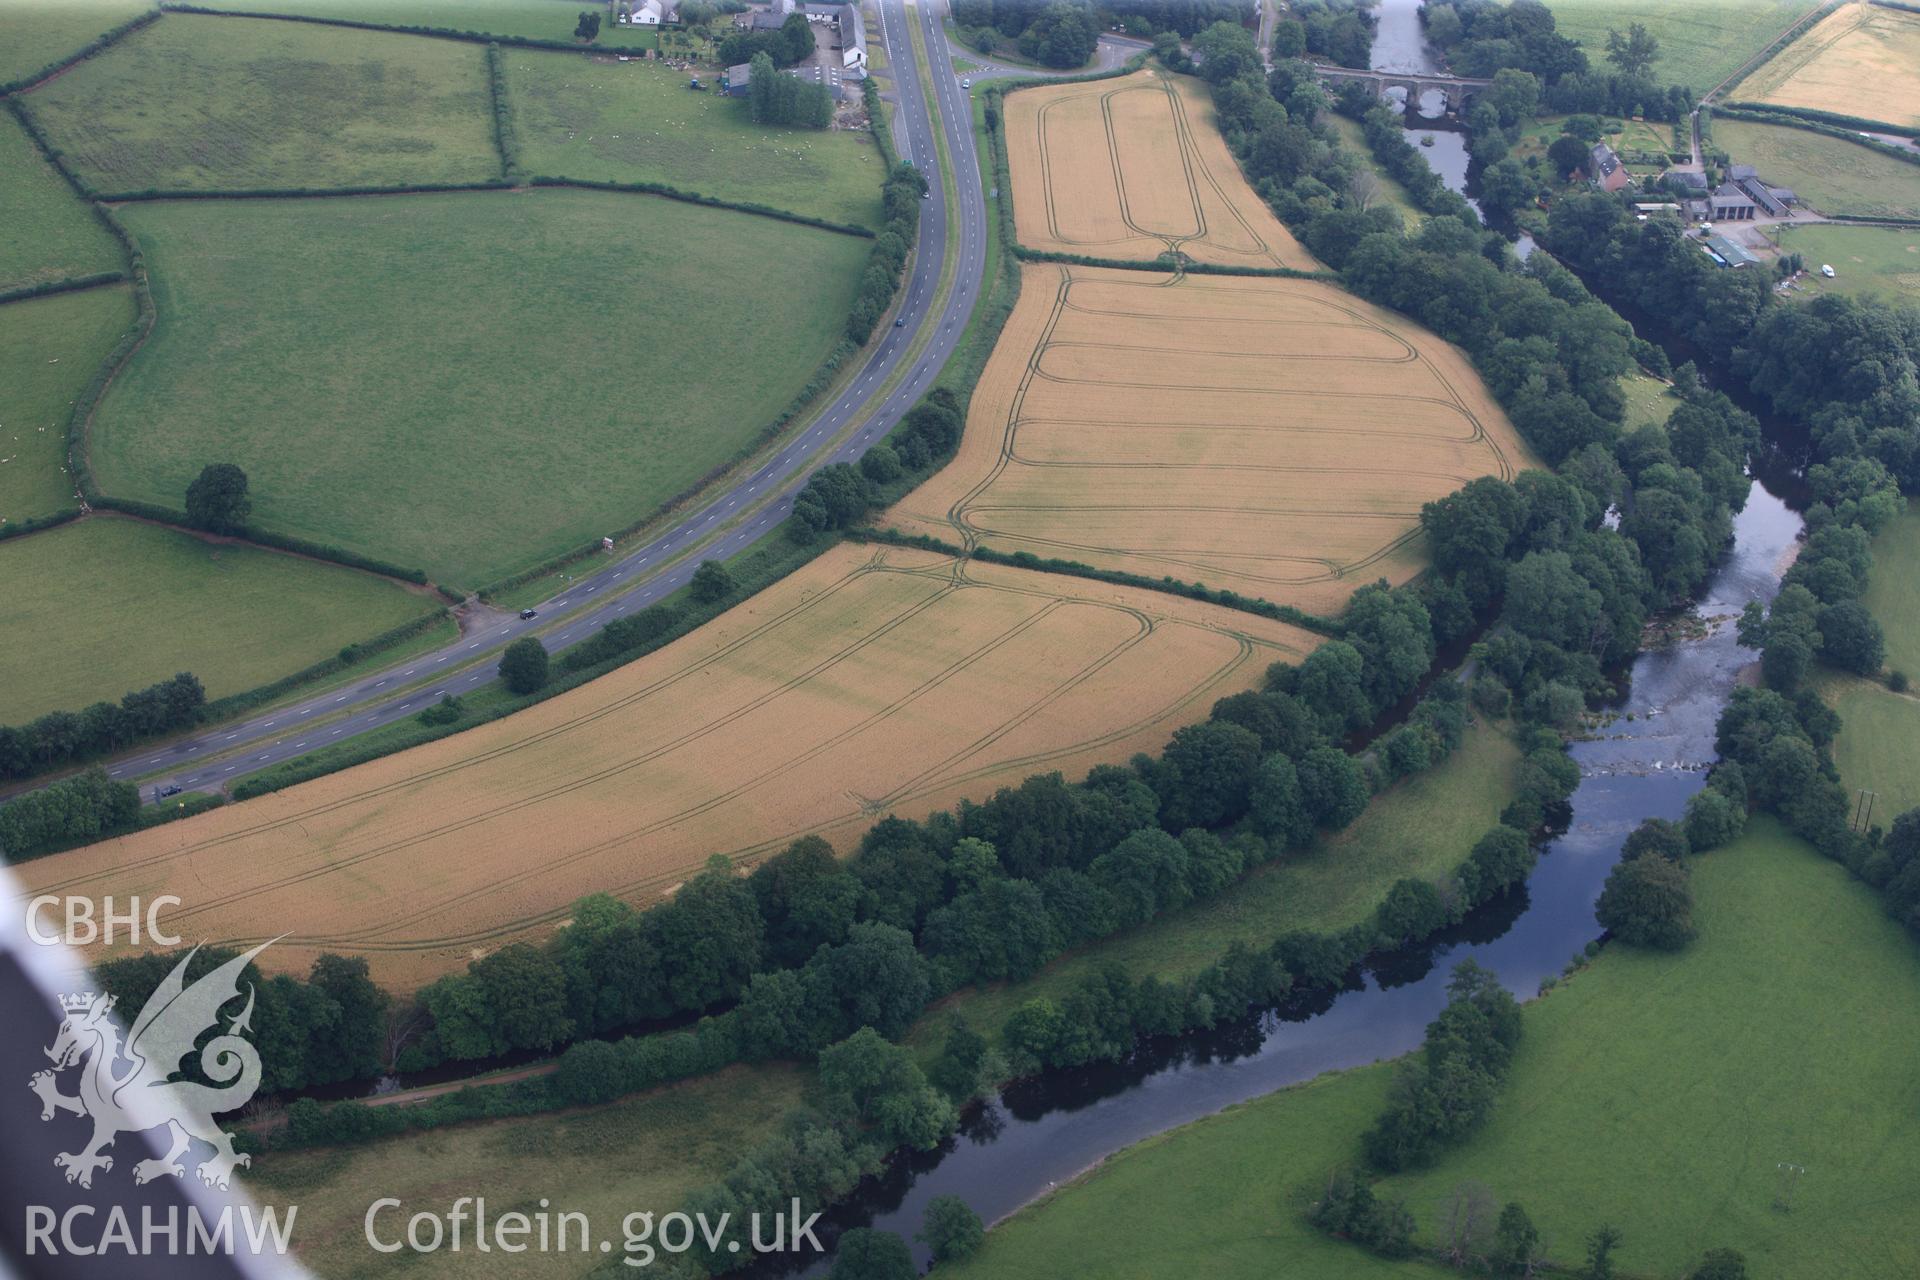 Cefn-brynich Roman fort, detailed view of cropmarks of Roman fort from south-west, taken by RCAHMW 1st August 2013.